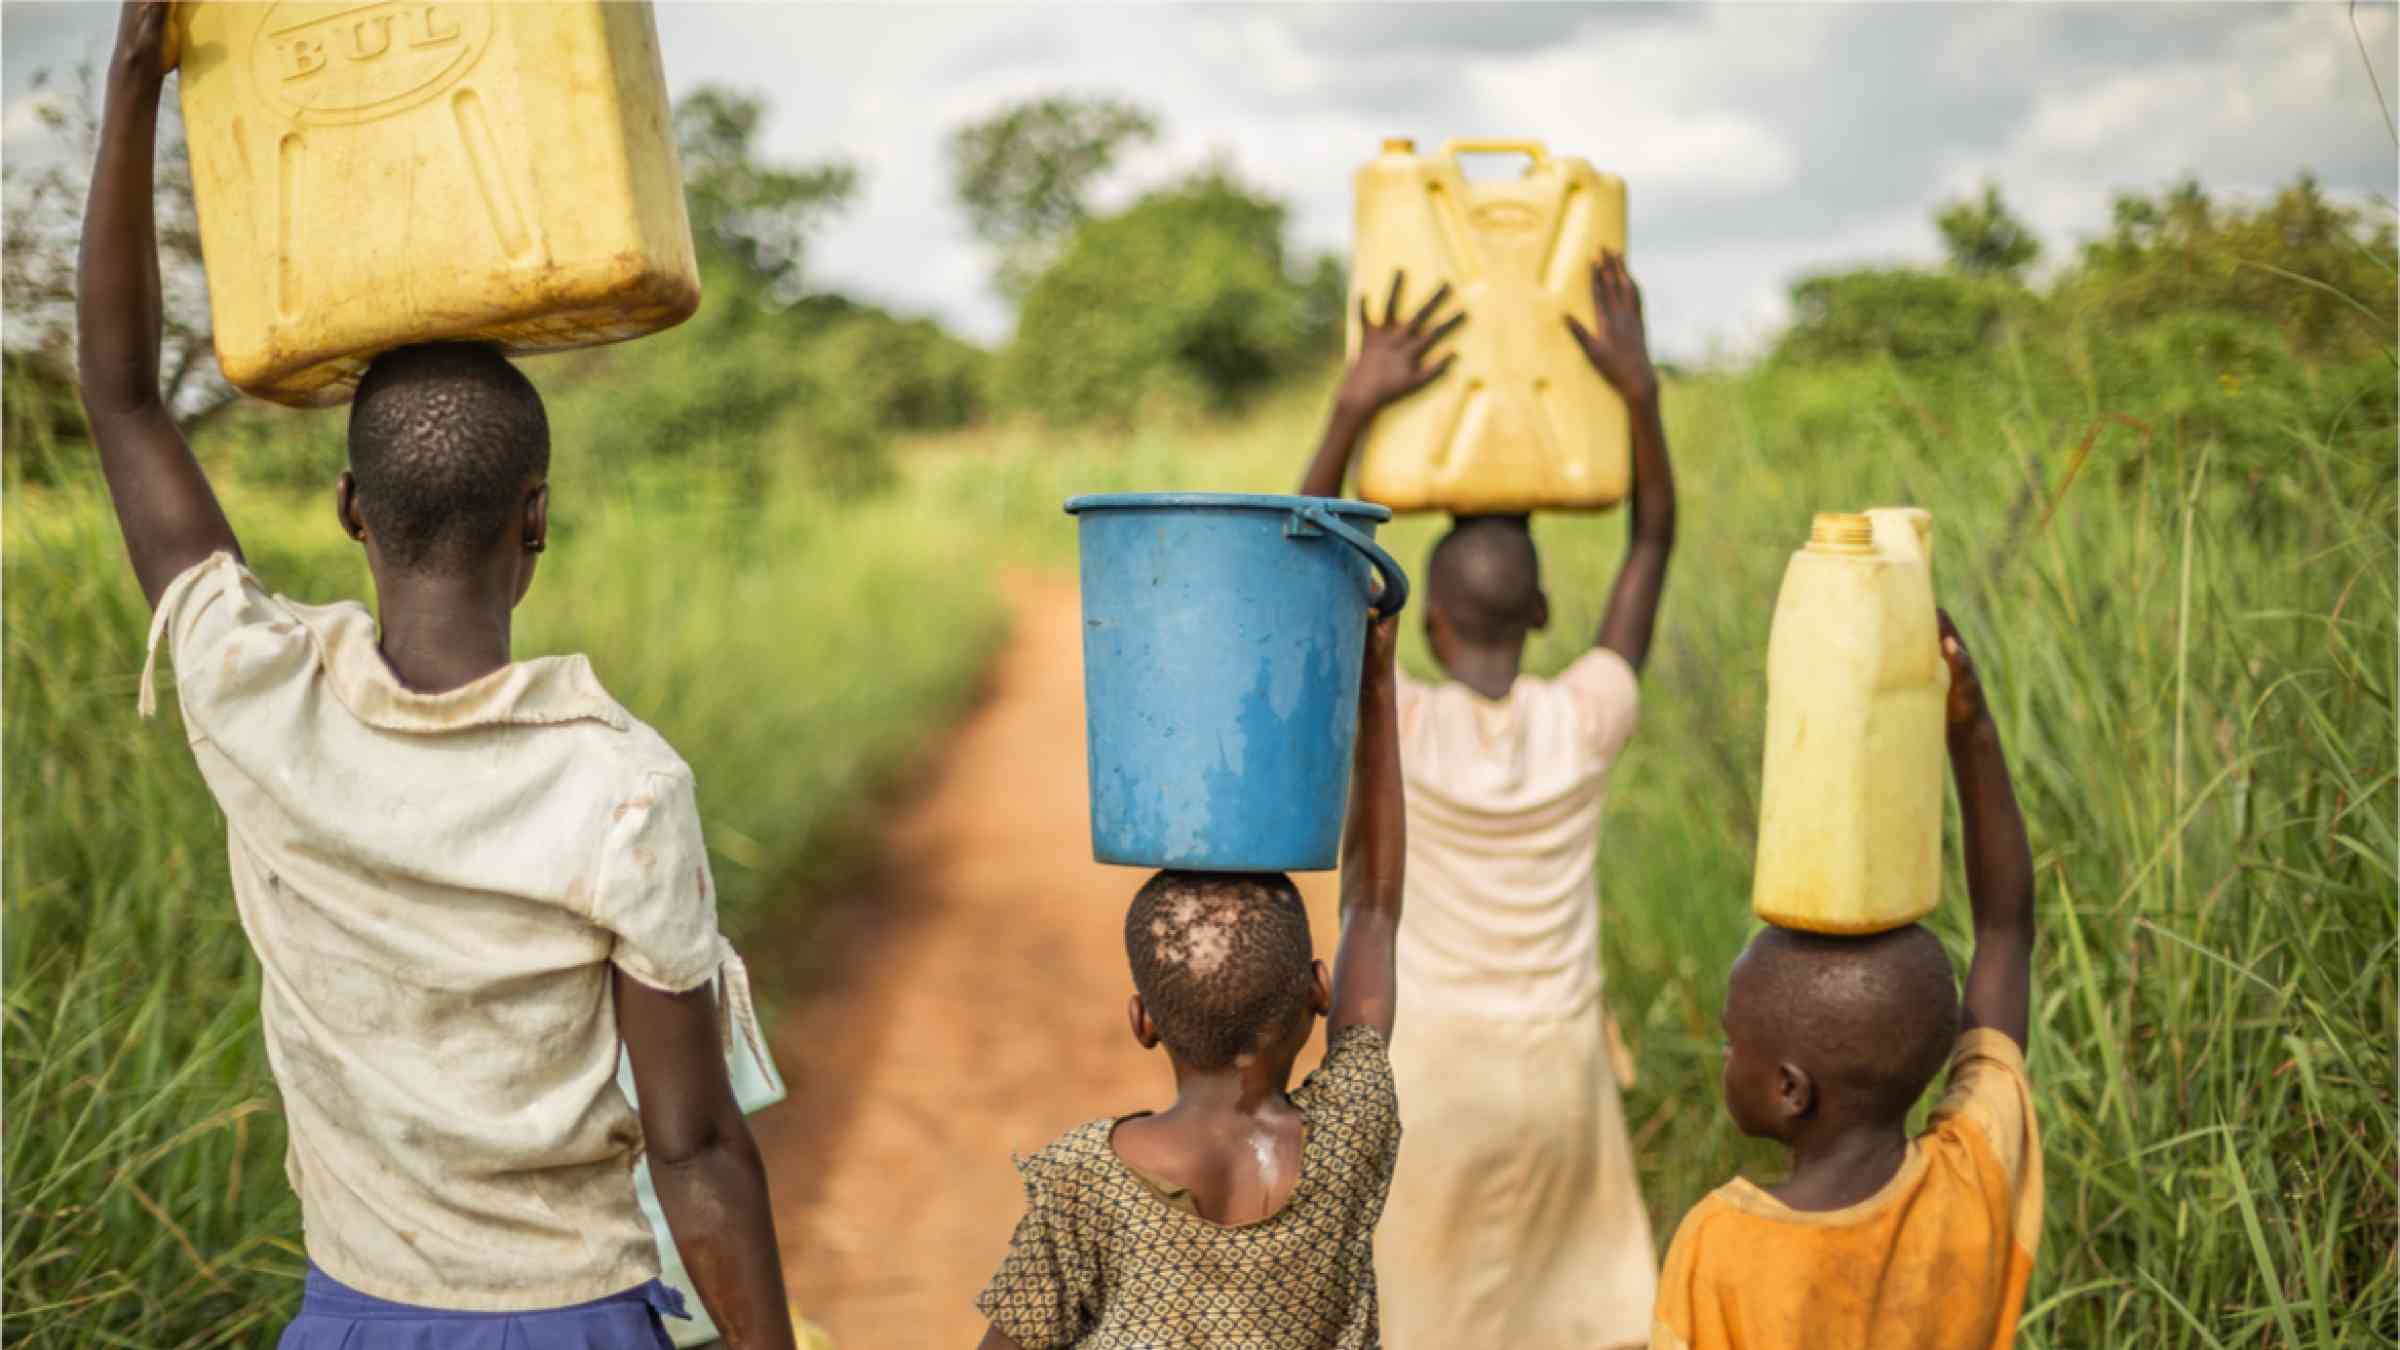 Group of young African children walk with buckets and jerrycans on their heads as they prepare to bring clean water back to their village.